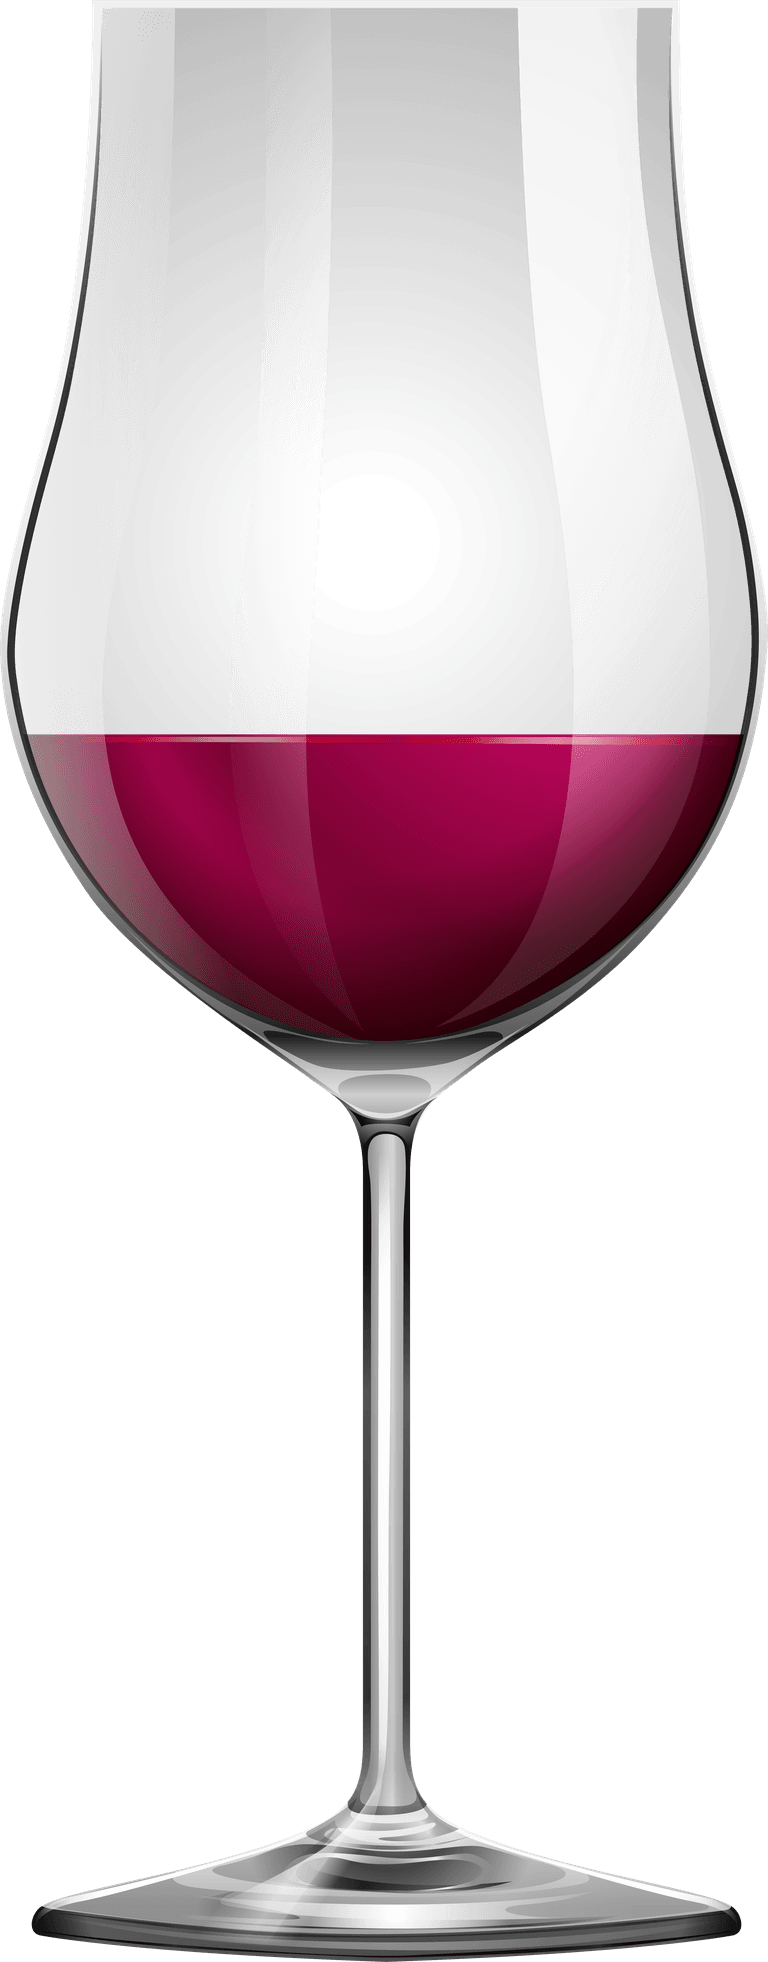 tall cup wine glasses filled with red and white wine illustration